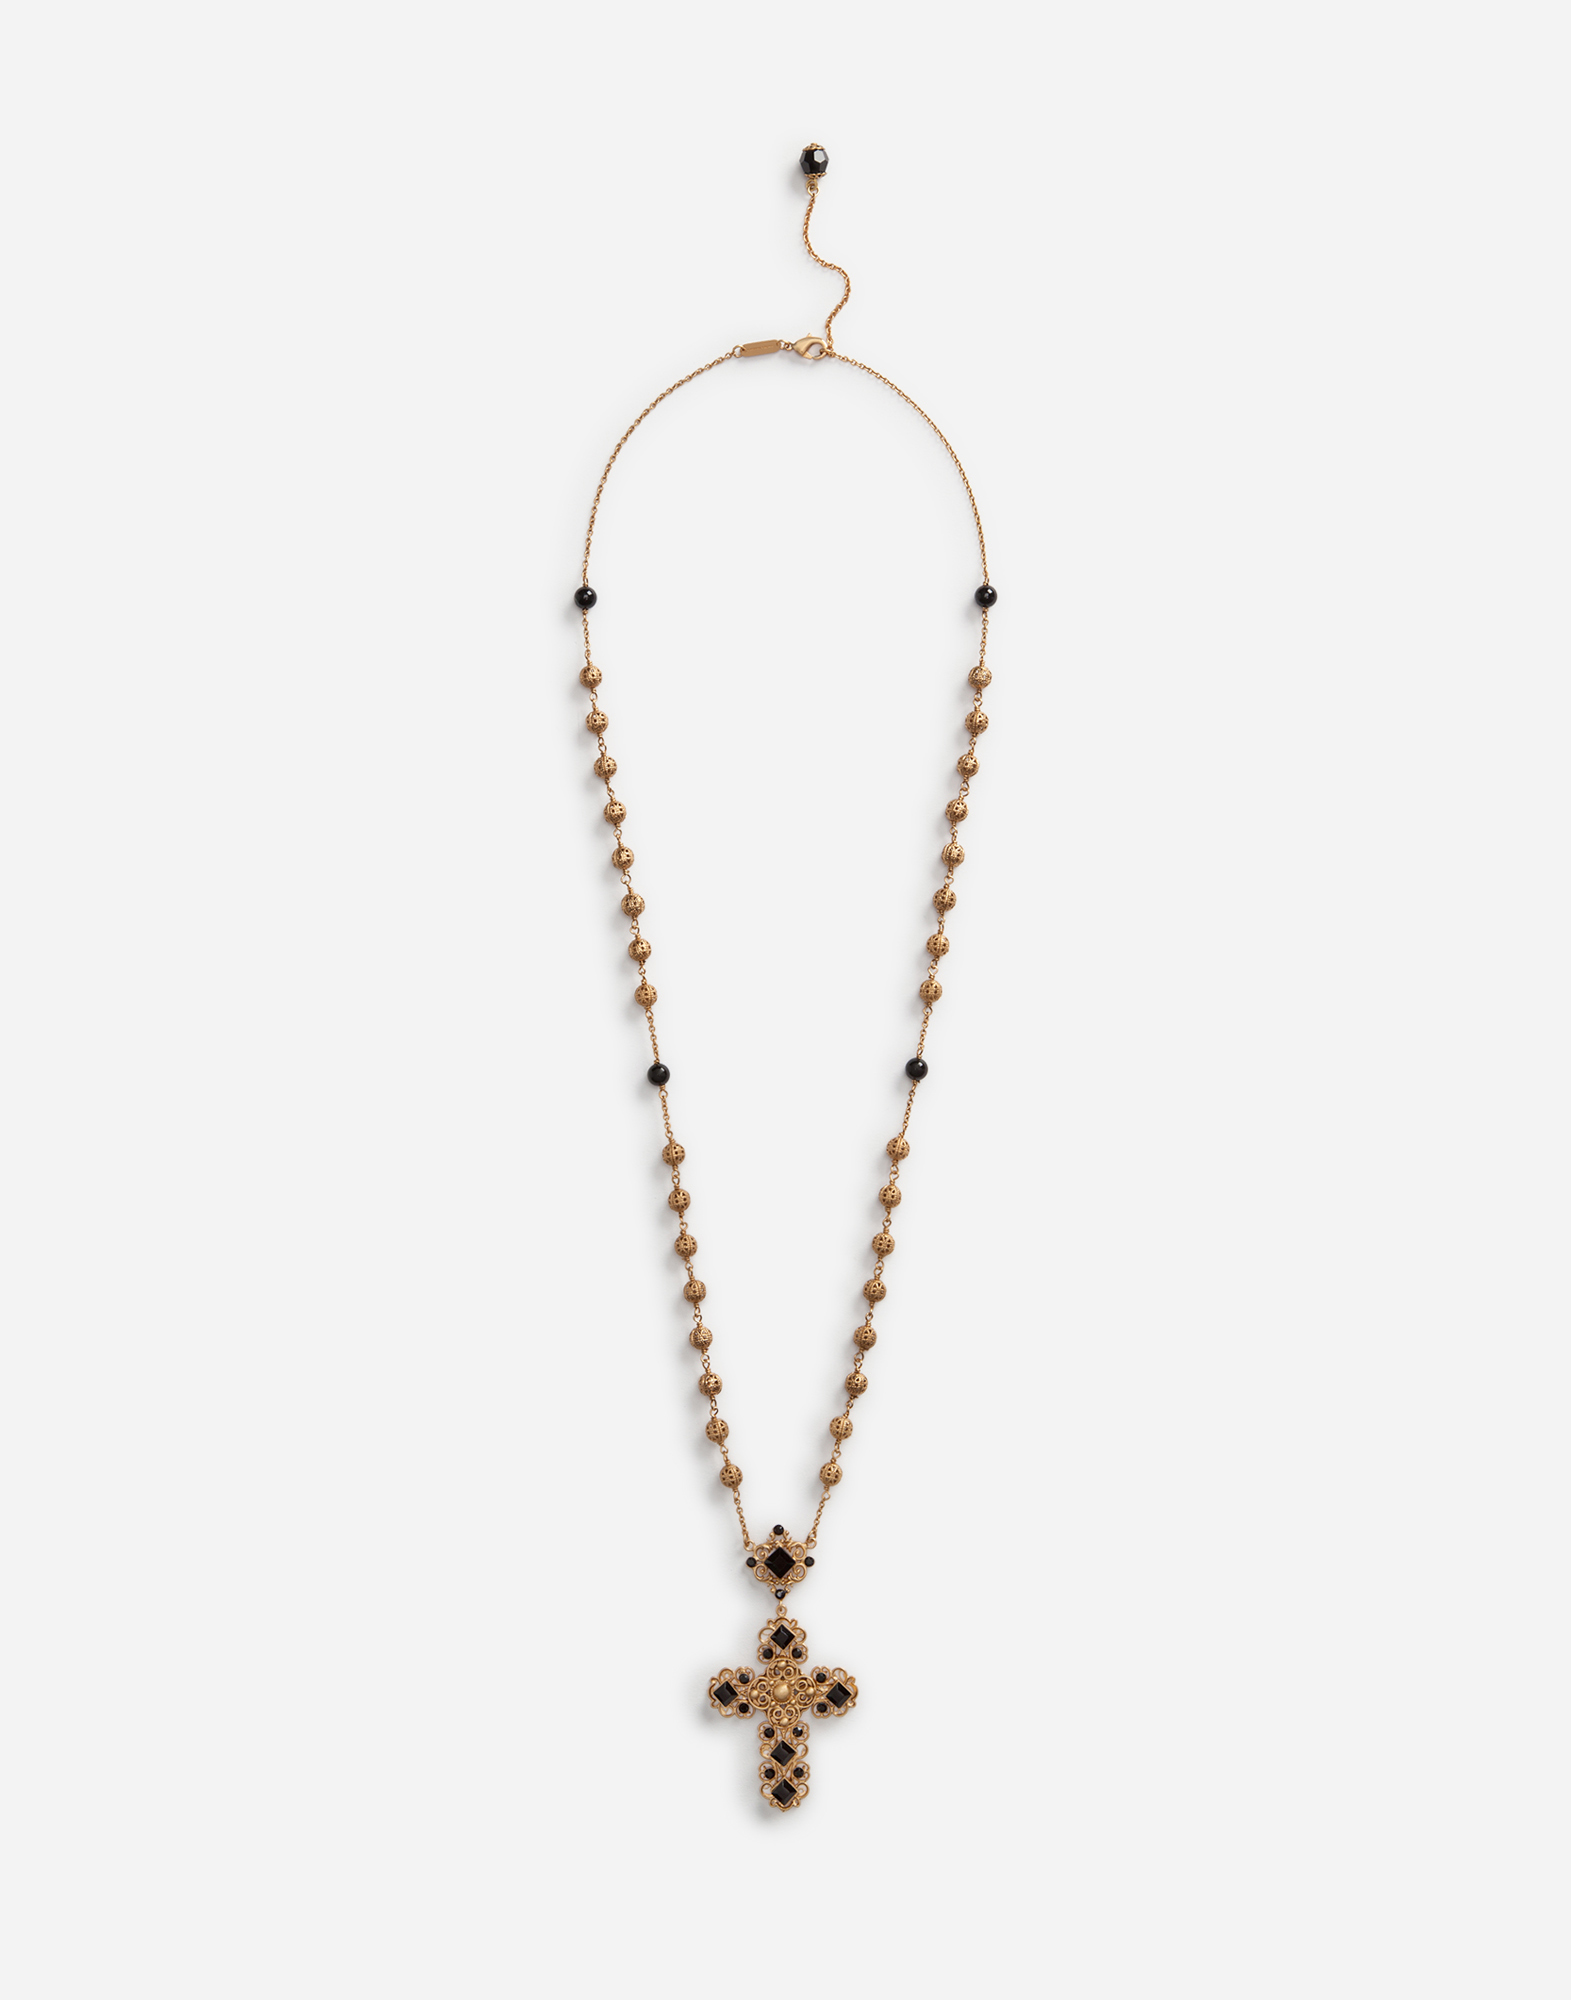 Cross pendant necklace in Gold